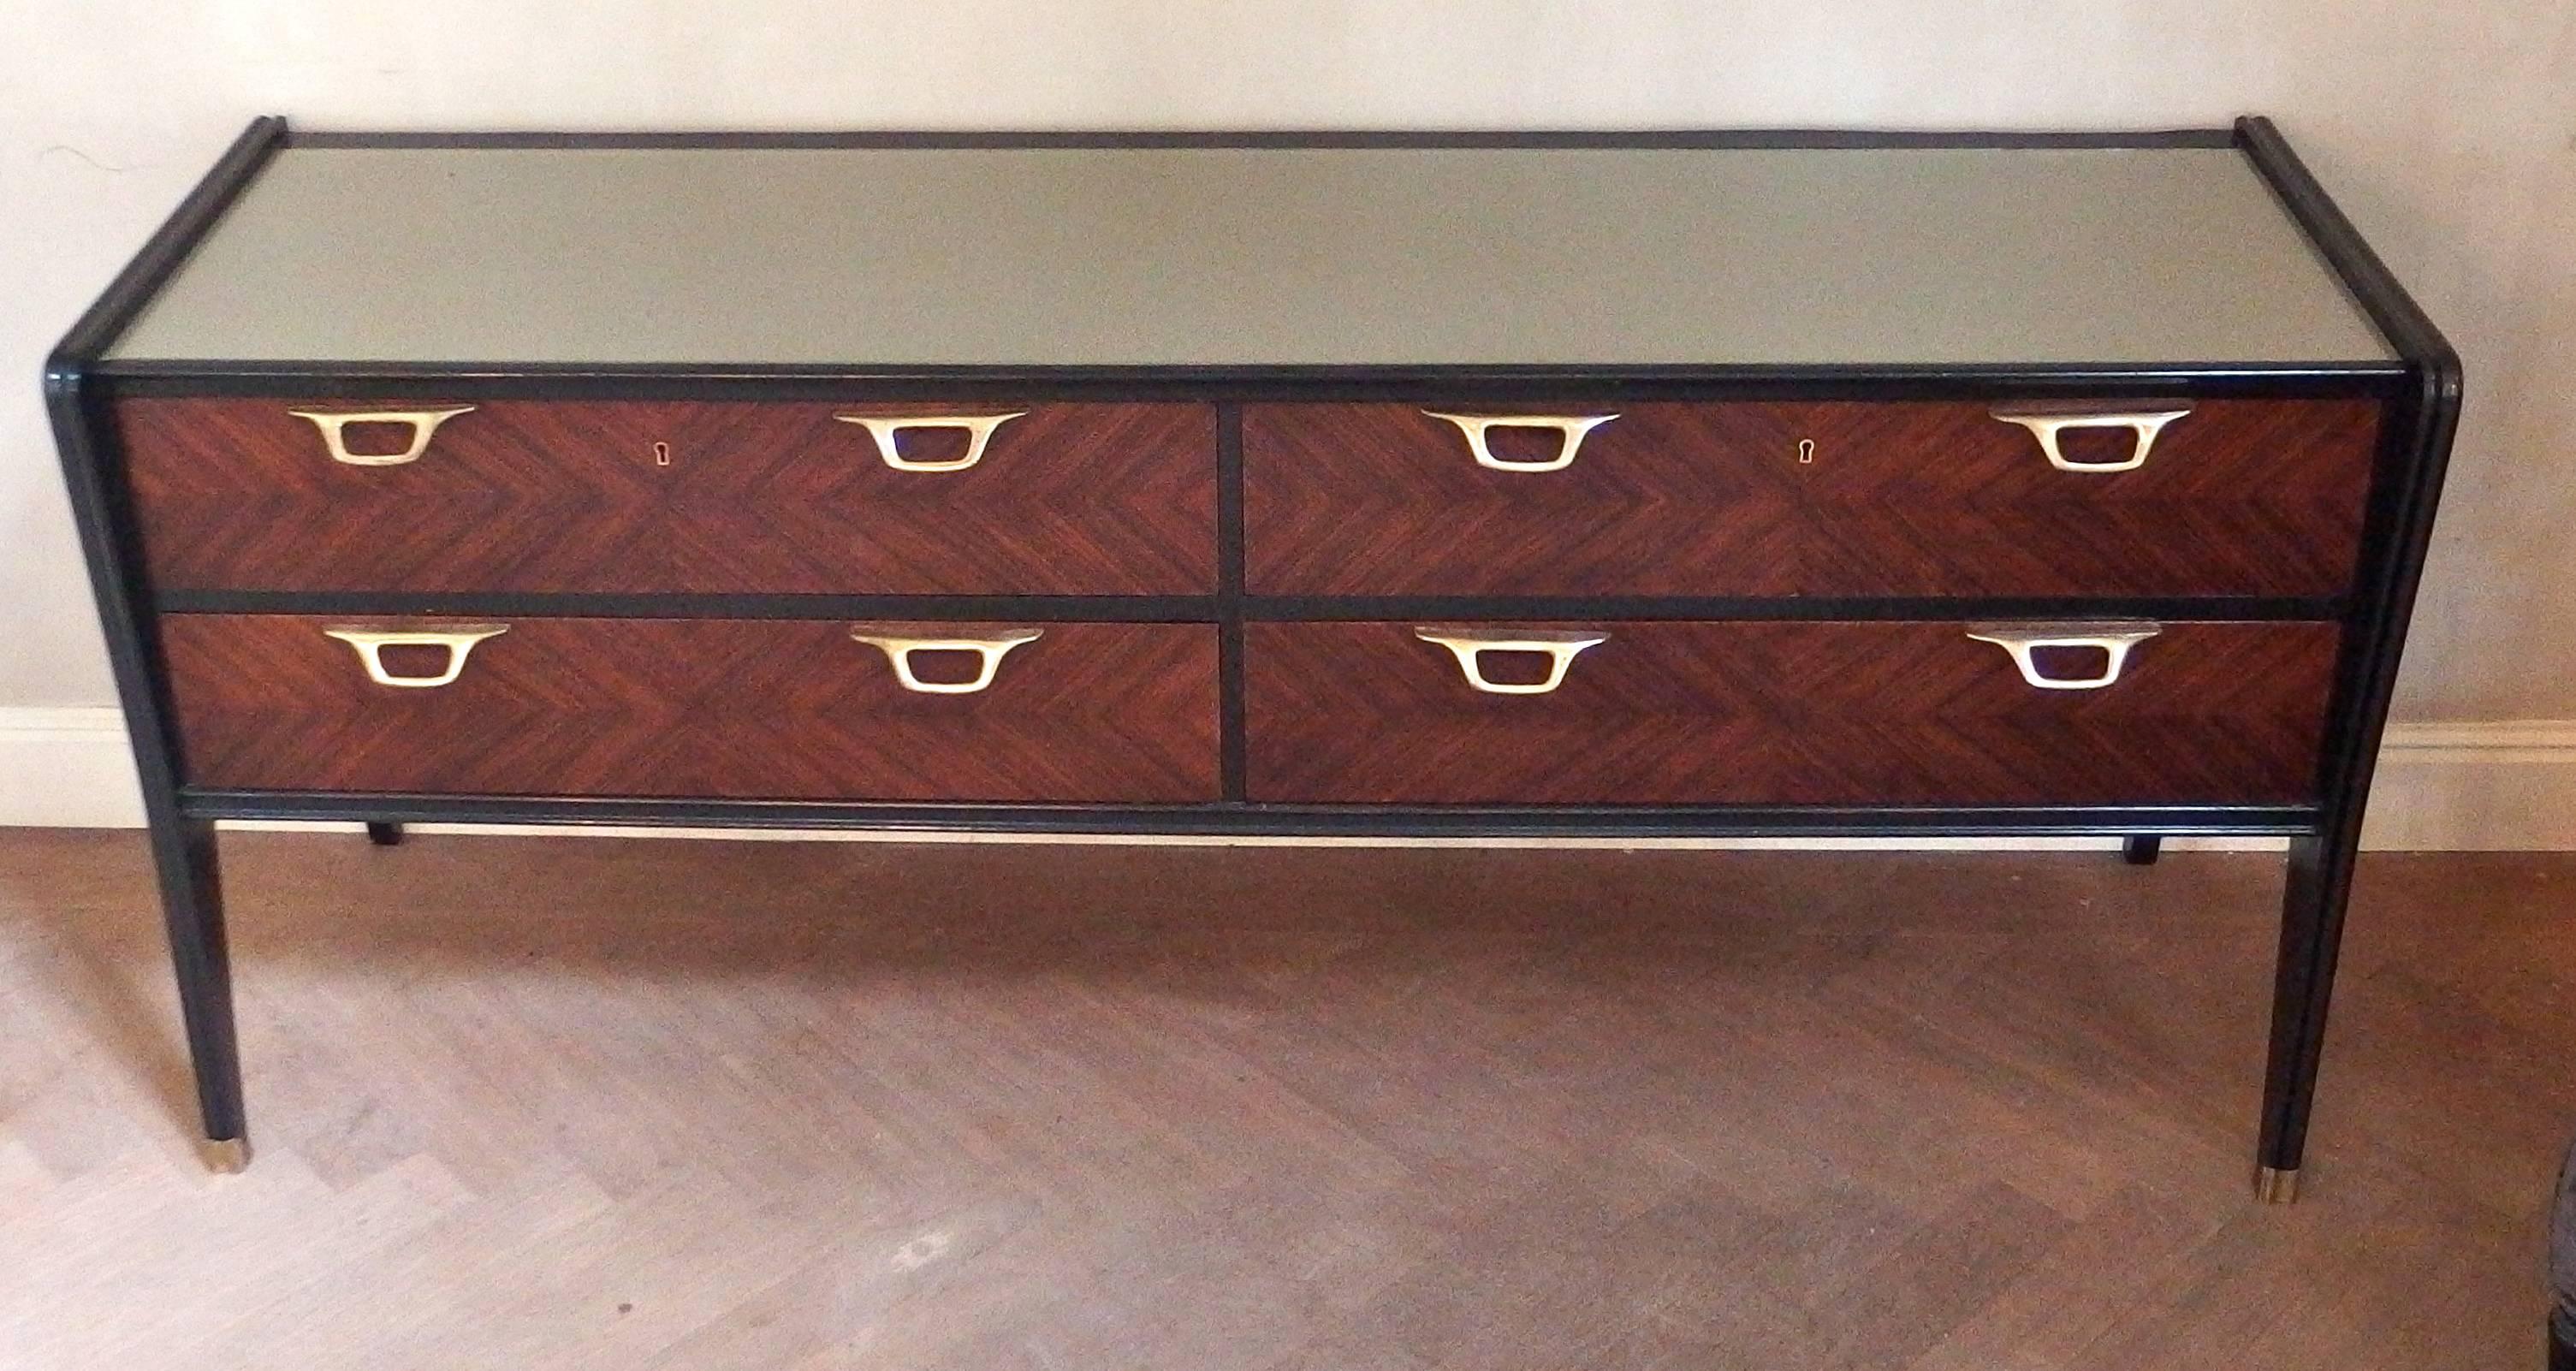 Beautiful Italian rosewood sideboard with herringbone parquetry front, silver-grey glass top and brass handles and sabots, attributed to Paolo Buffa.